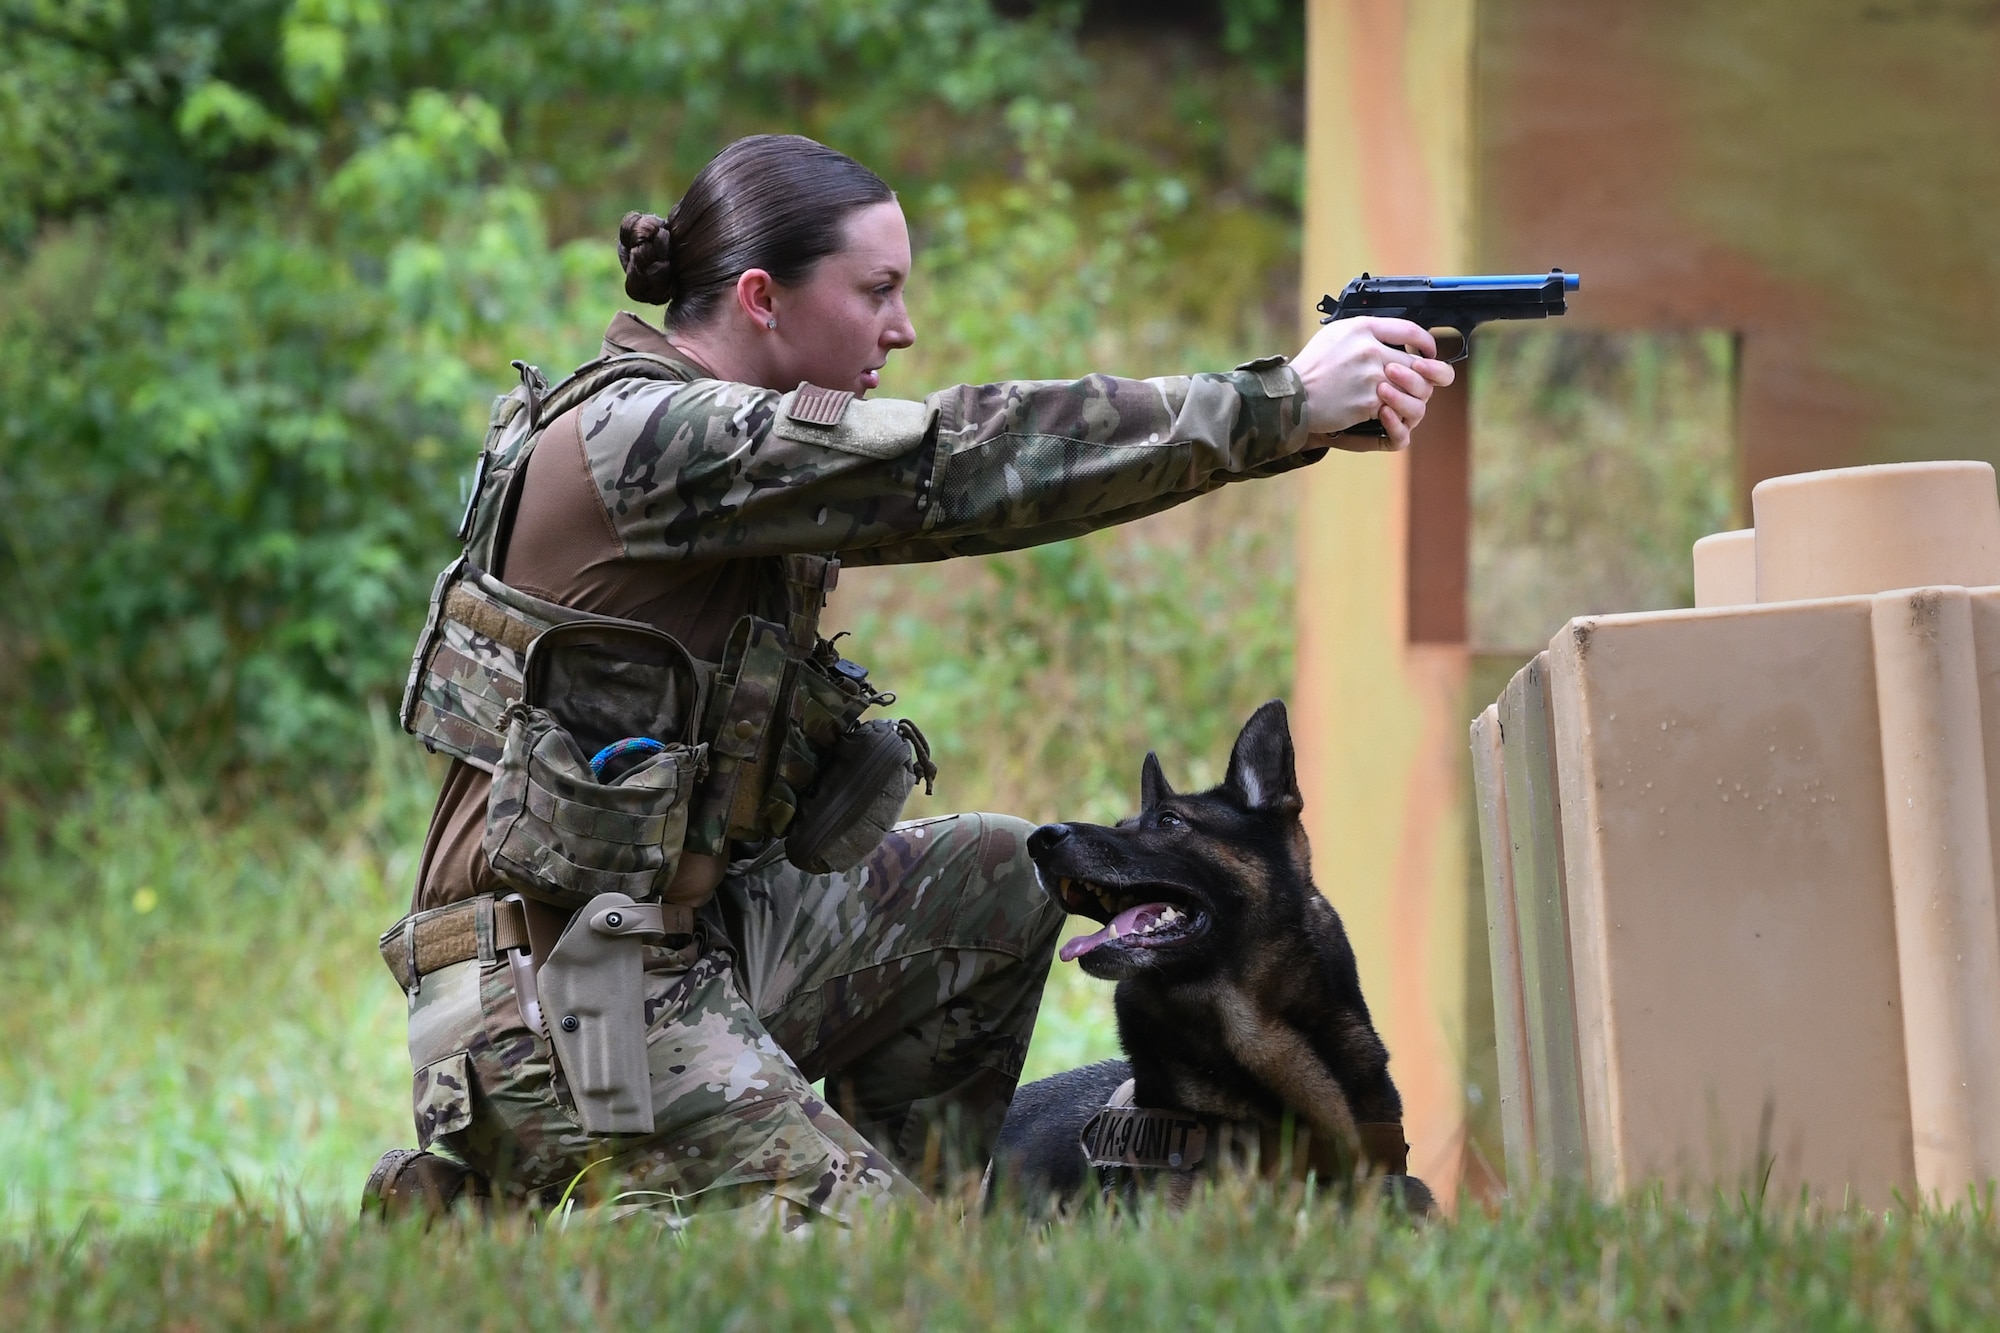 316th Security Support Squadron hosts “Top Dog” competition